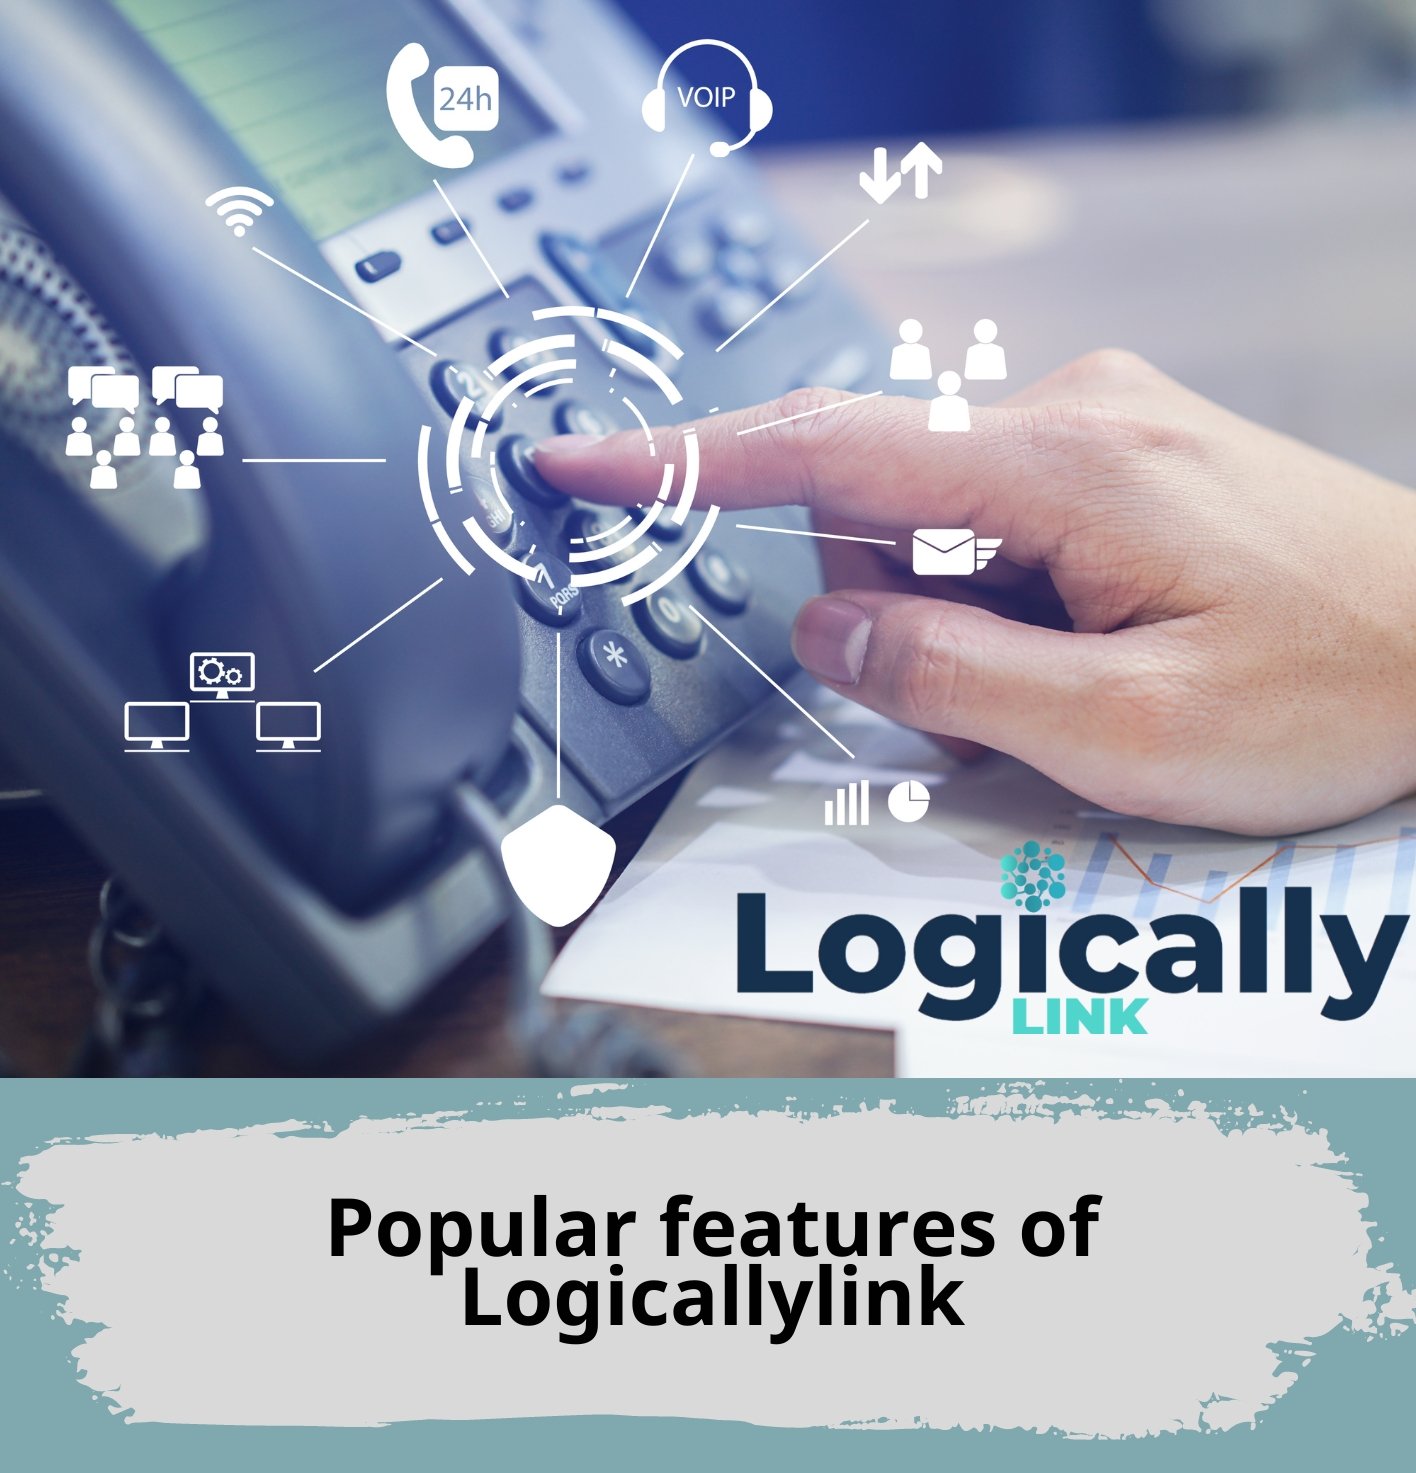 Popular features of Logicallylink